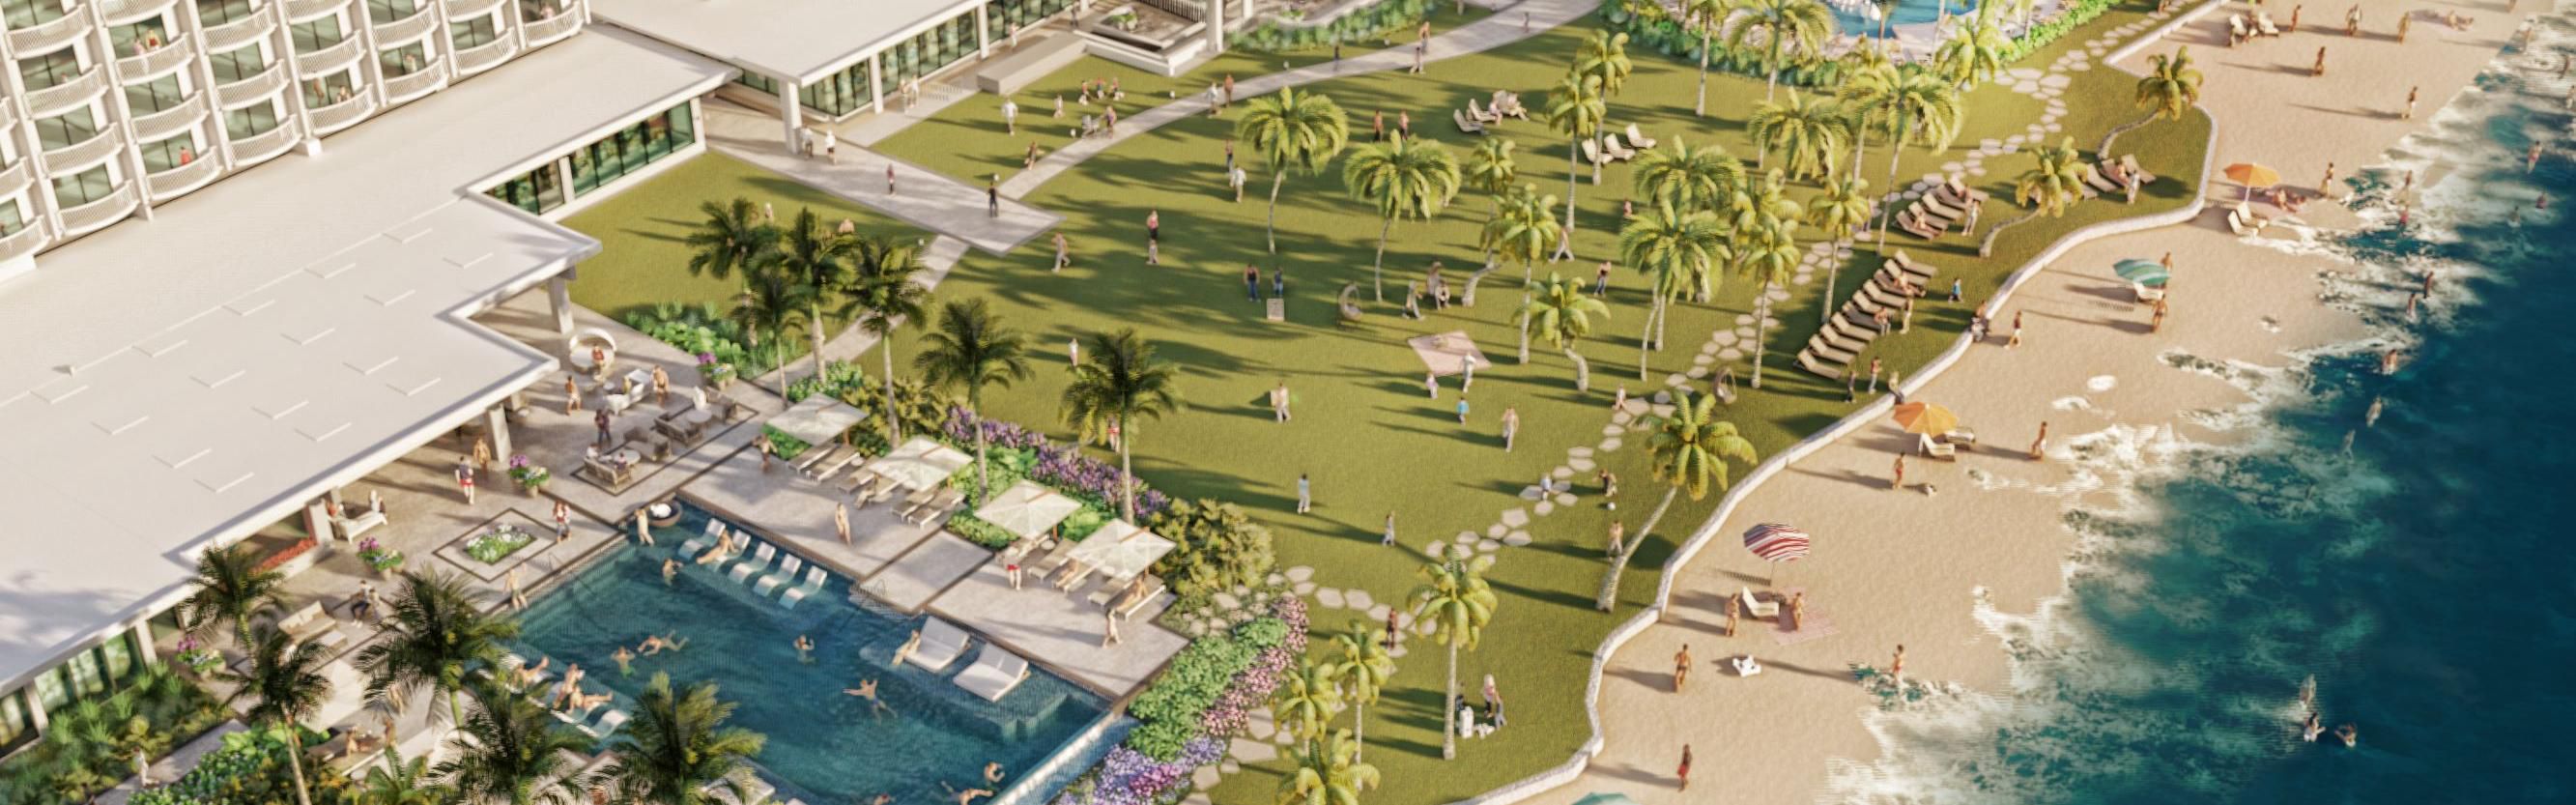 Hotel Garden and Swimming Pool Rendering